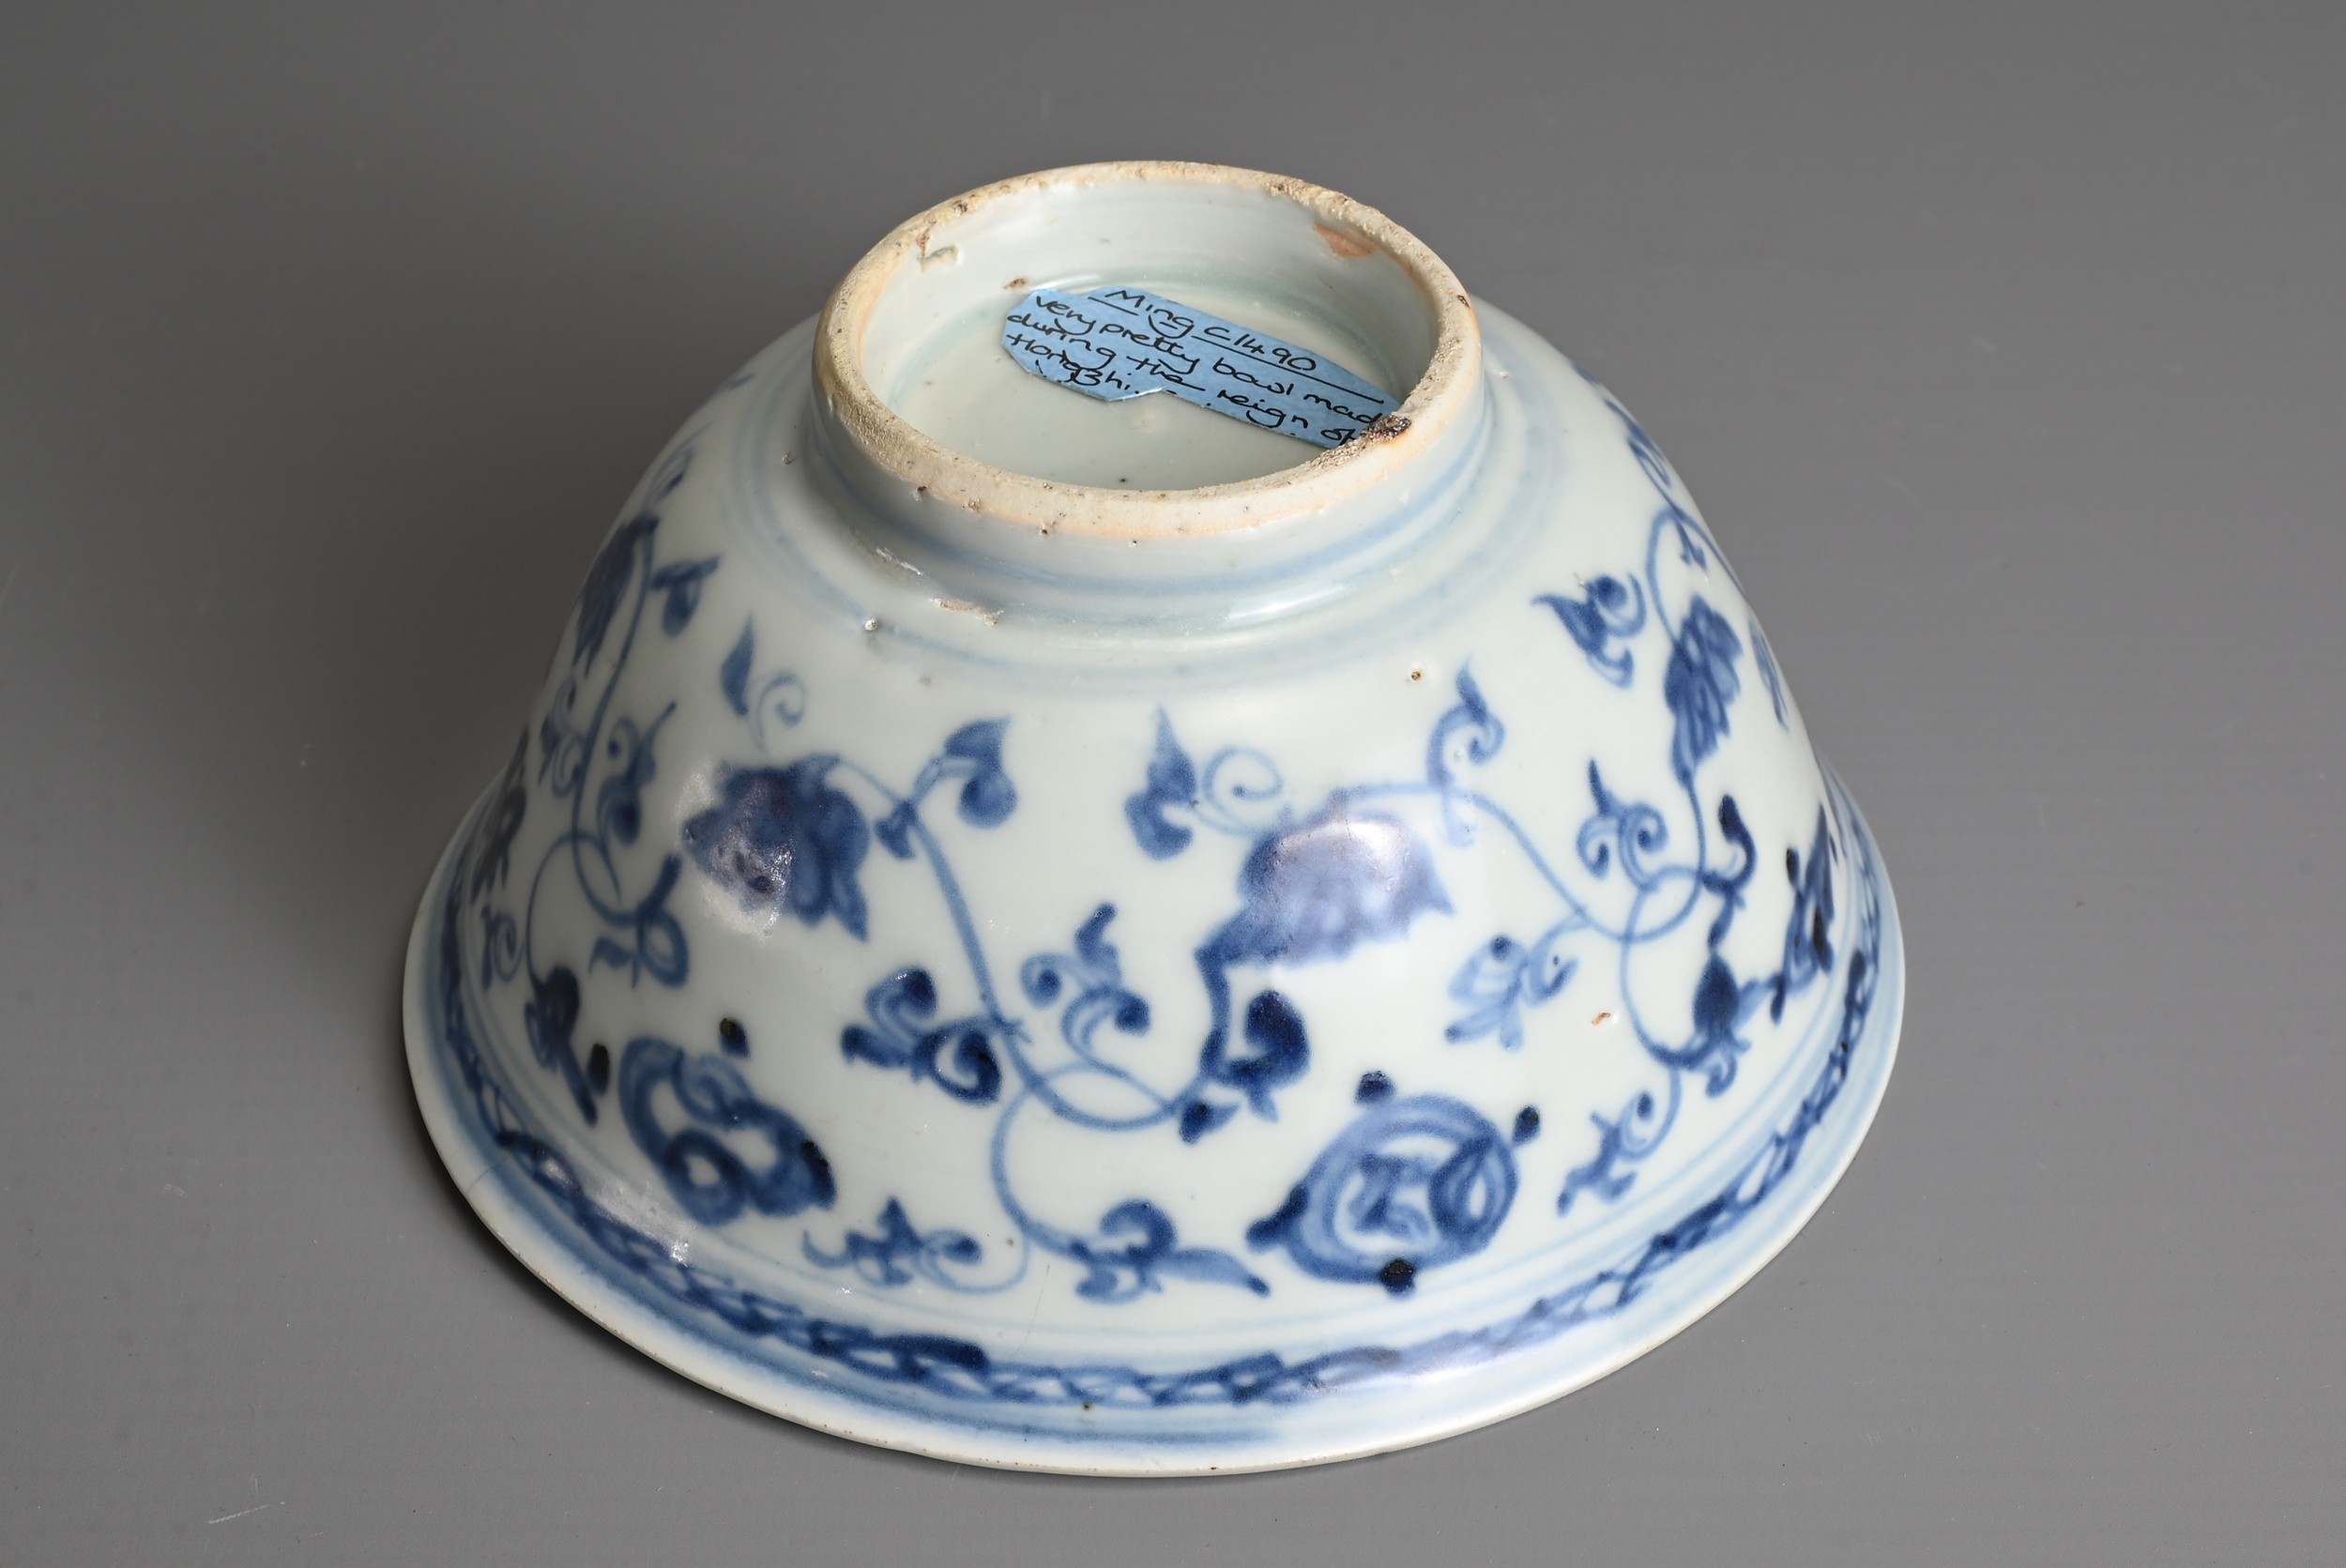 A CHINESE BLUE AND WHITE PORCELAIN BOWL, MING DYNASTY. Decorated with lotus scrolls and Buddhist - Image 7 of 7